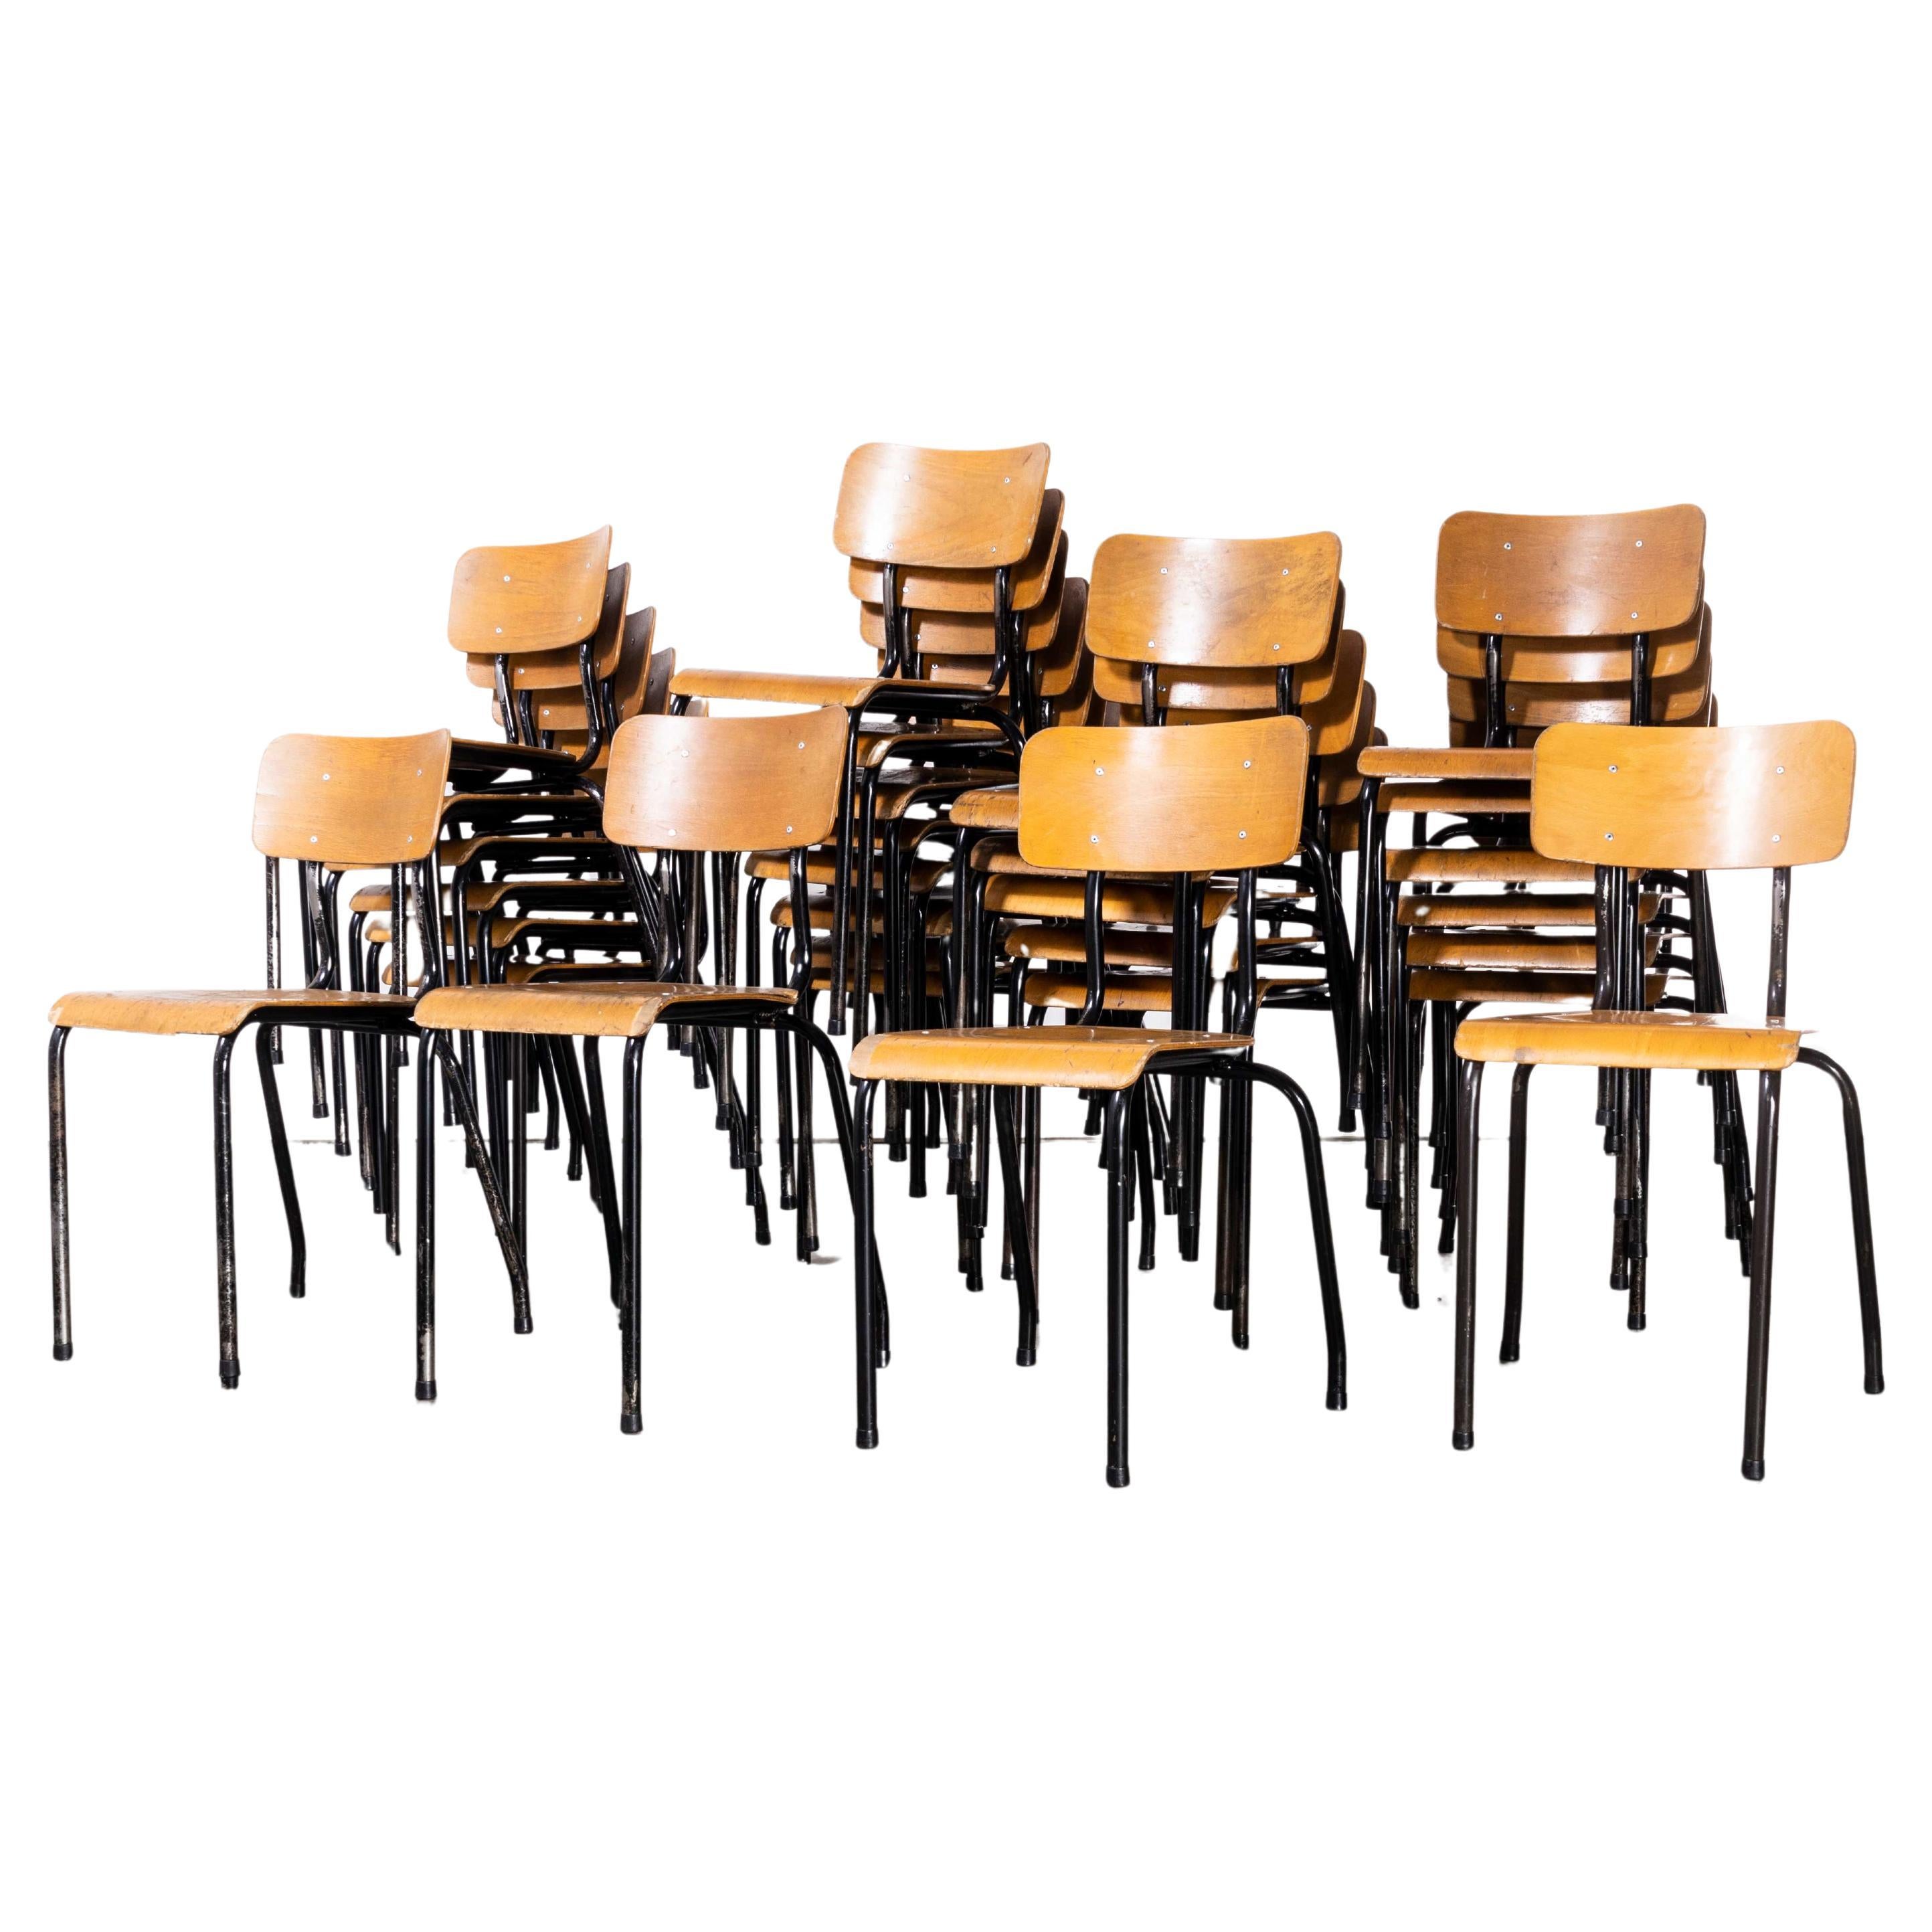 1960's Batch Of Belgian Stacking School Chairs - Set Of Eighteen For Sale